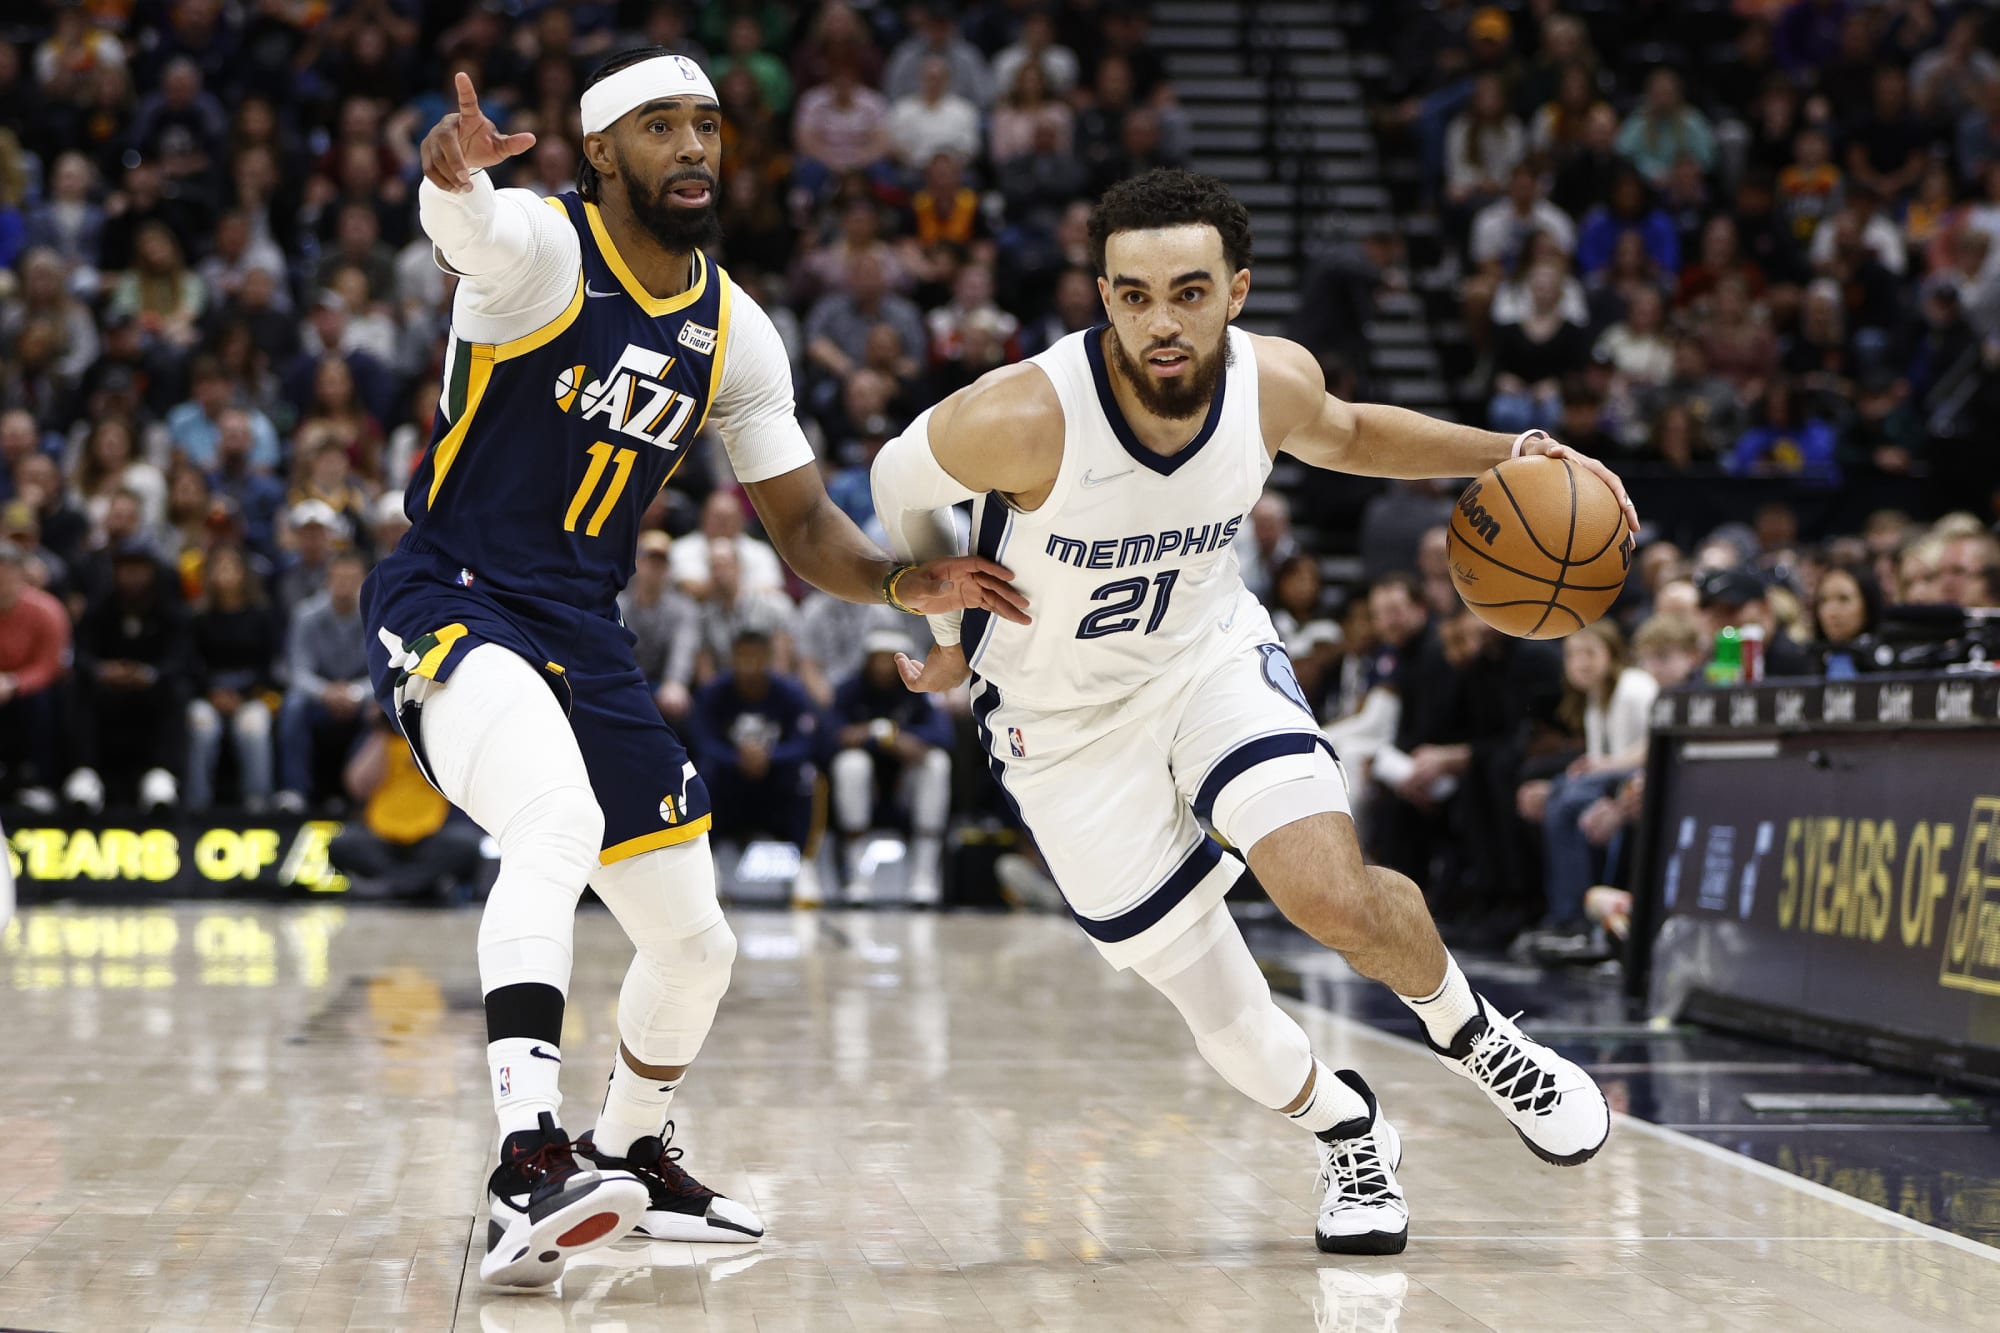 Tyus Jones pitches perfect game as Grizzlies continue to pick up steam